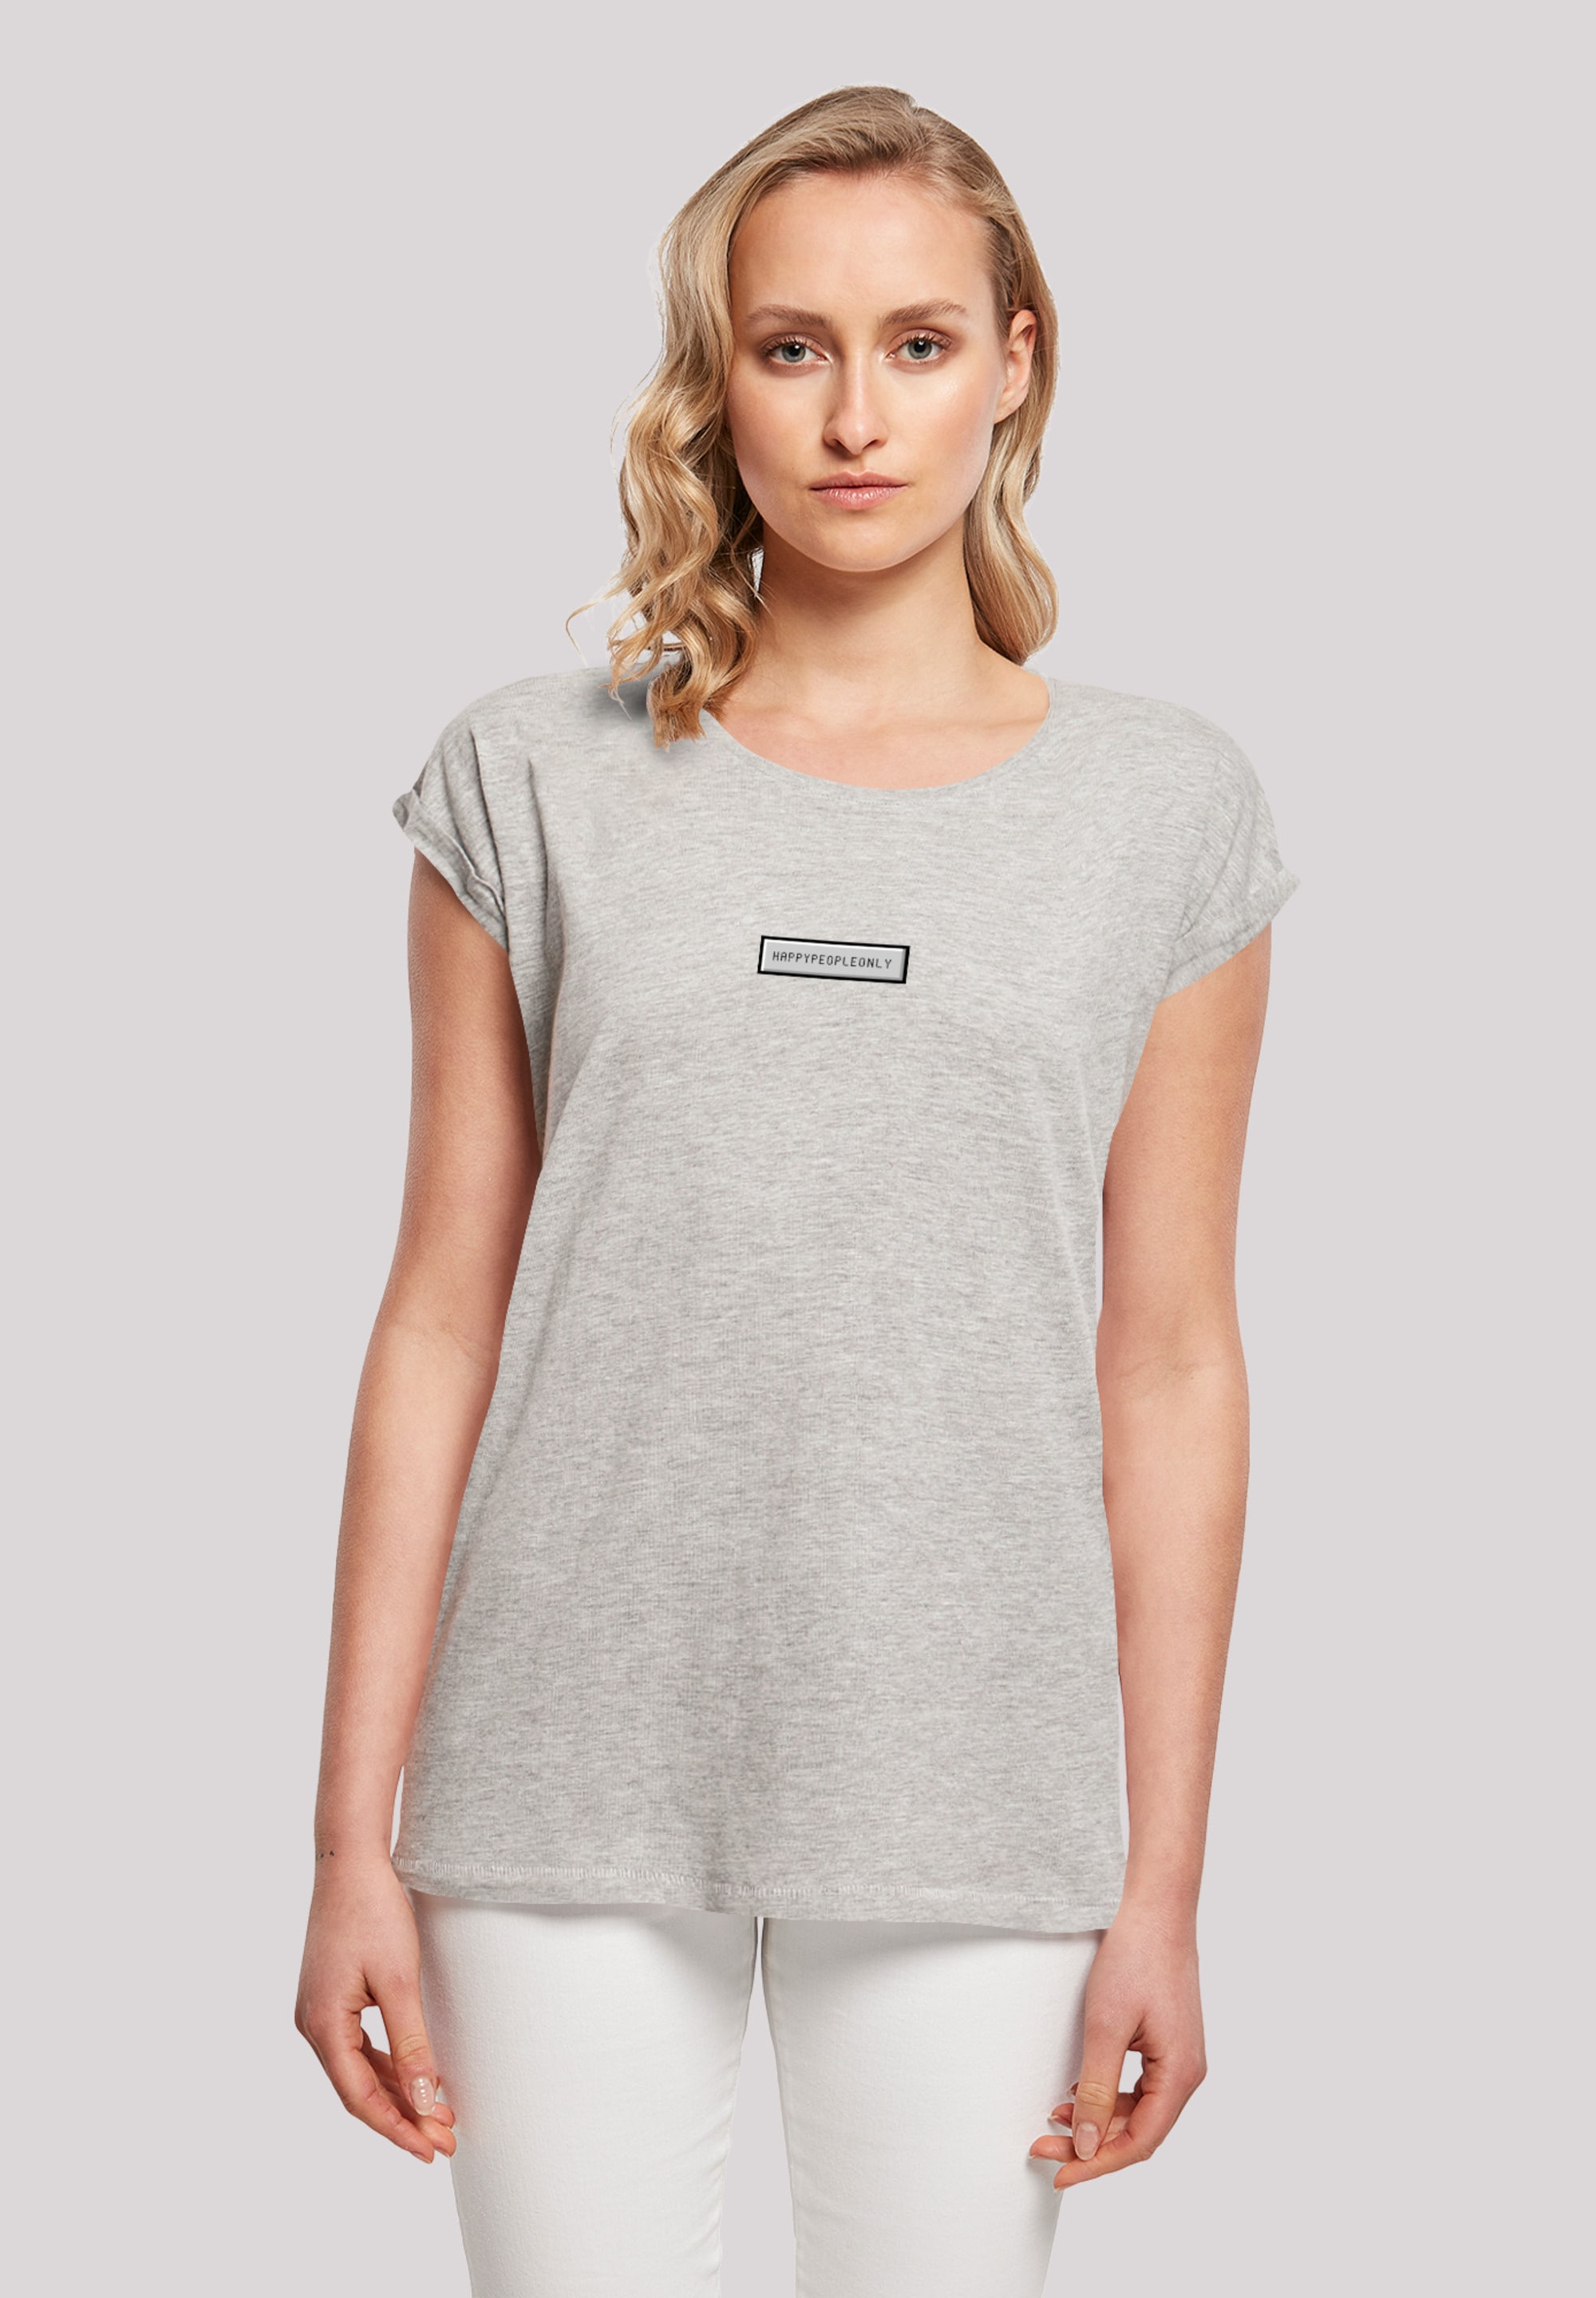 People Only«, I\'m Party Print »SIlvester F4NT4STIC T-Shirt bestellen | walking Happy